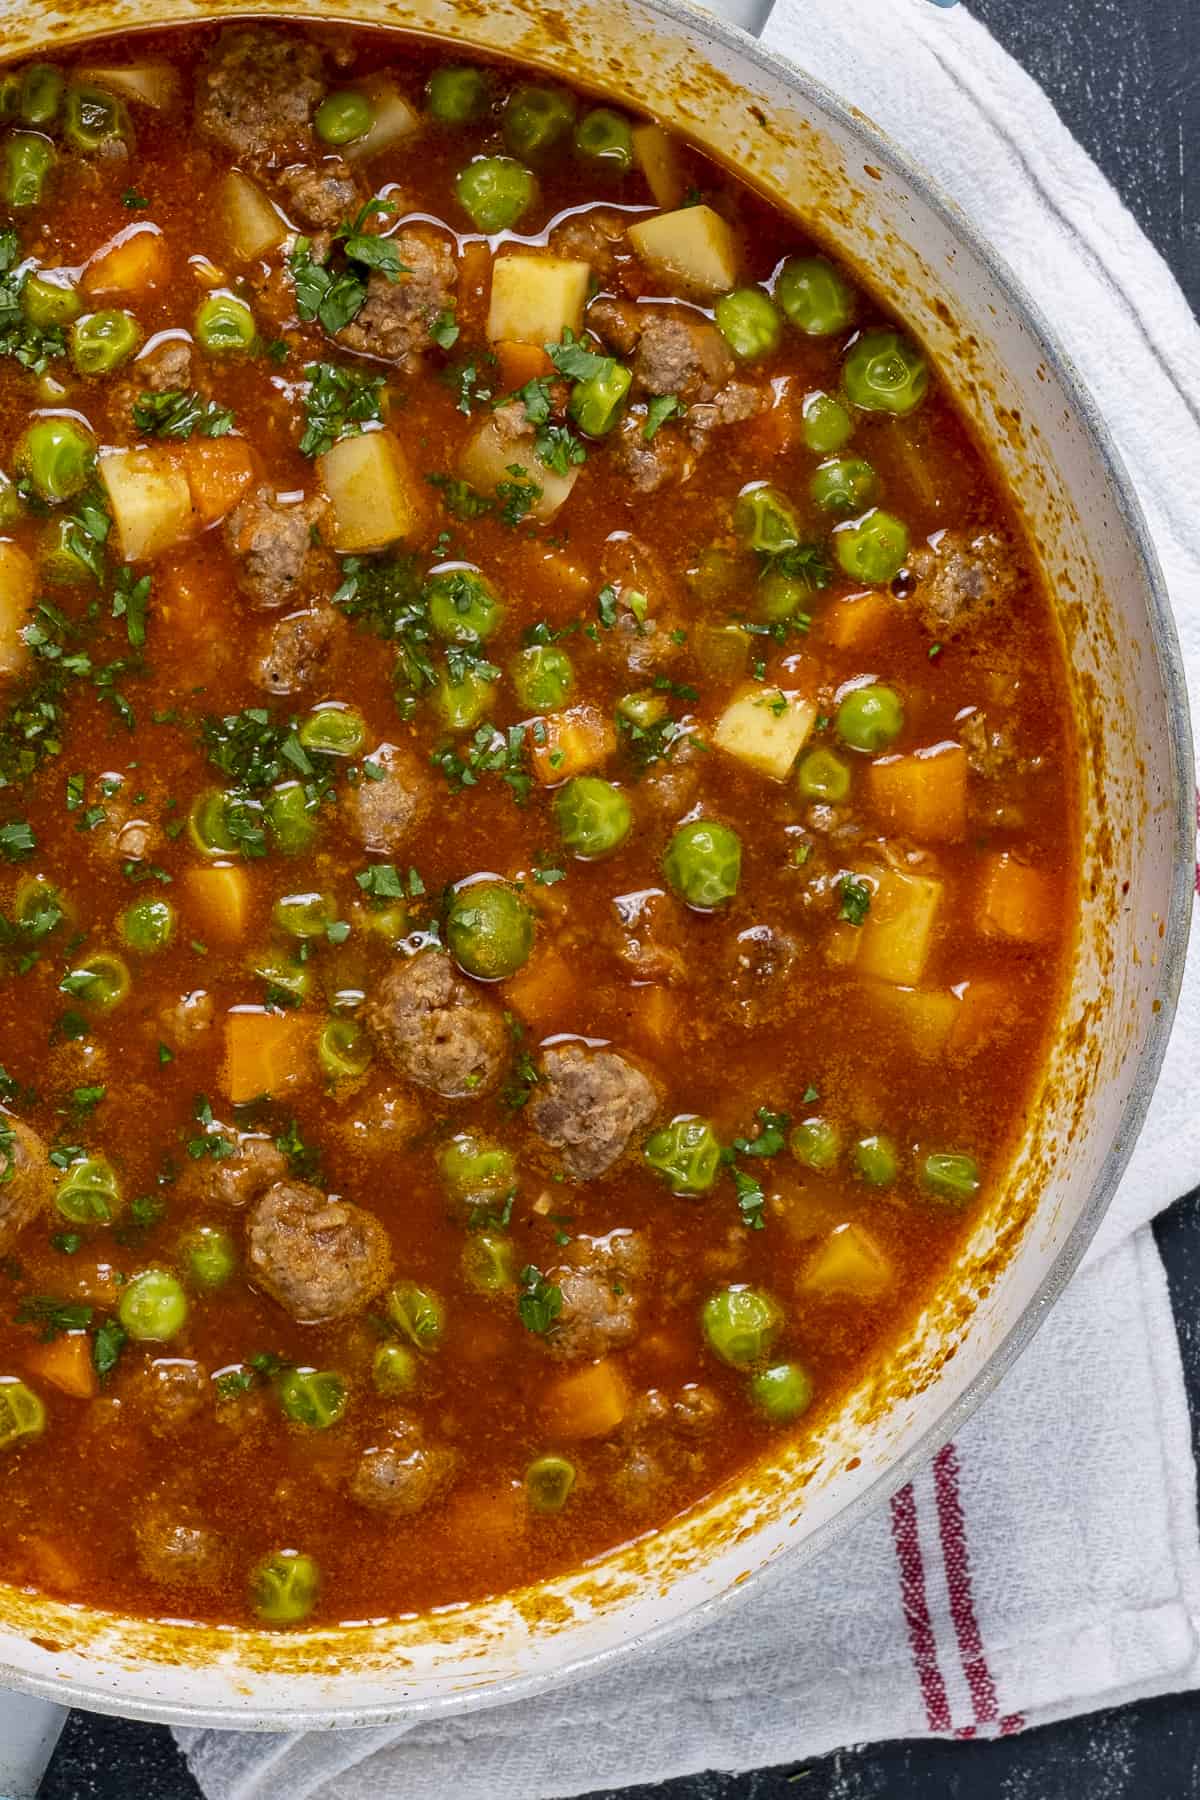 Meatball stew with potatoes, carrots and peas in a pan.